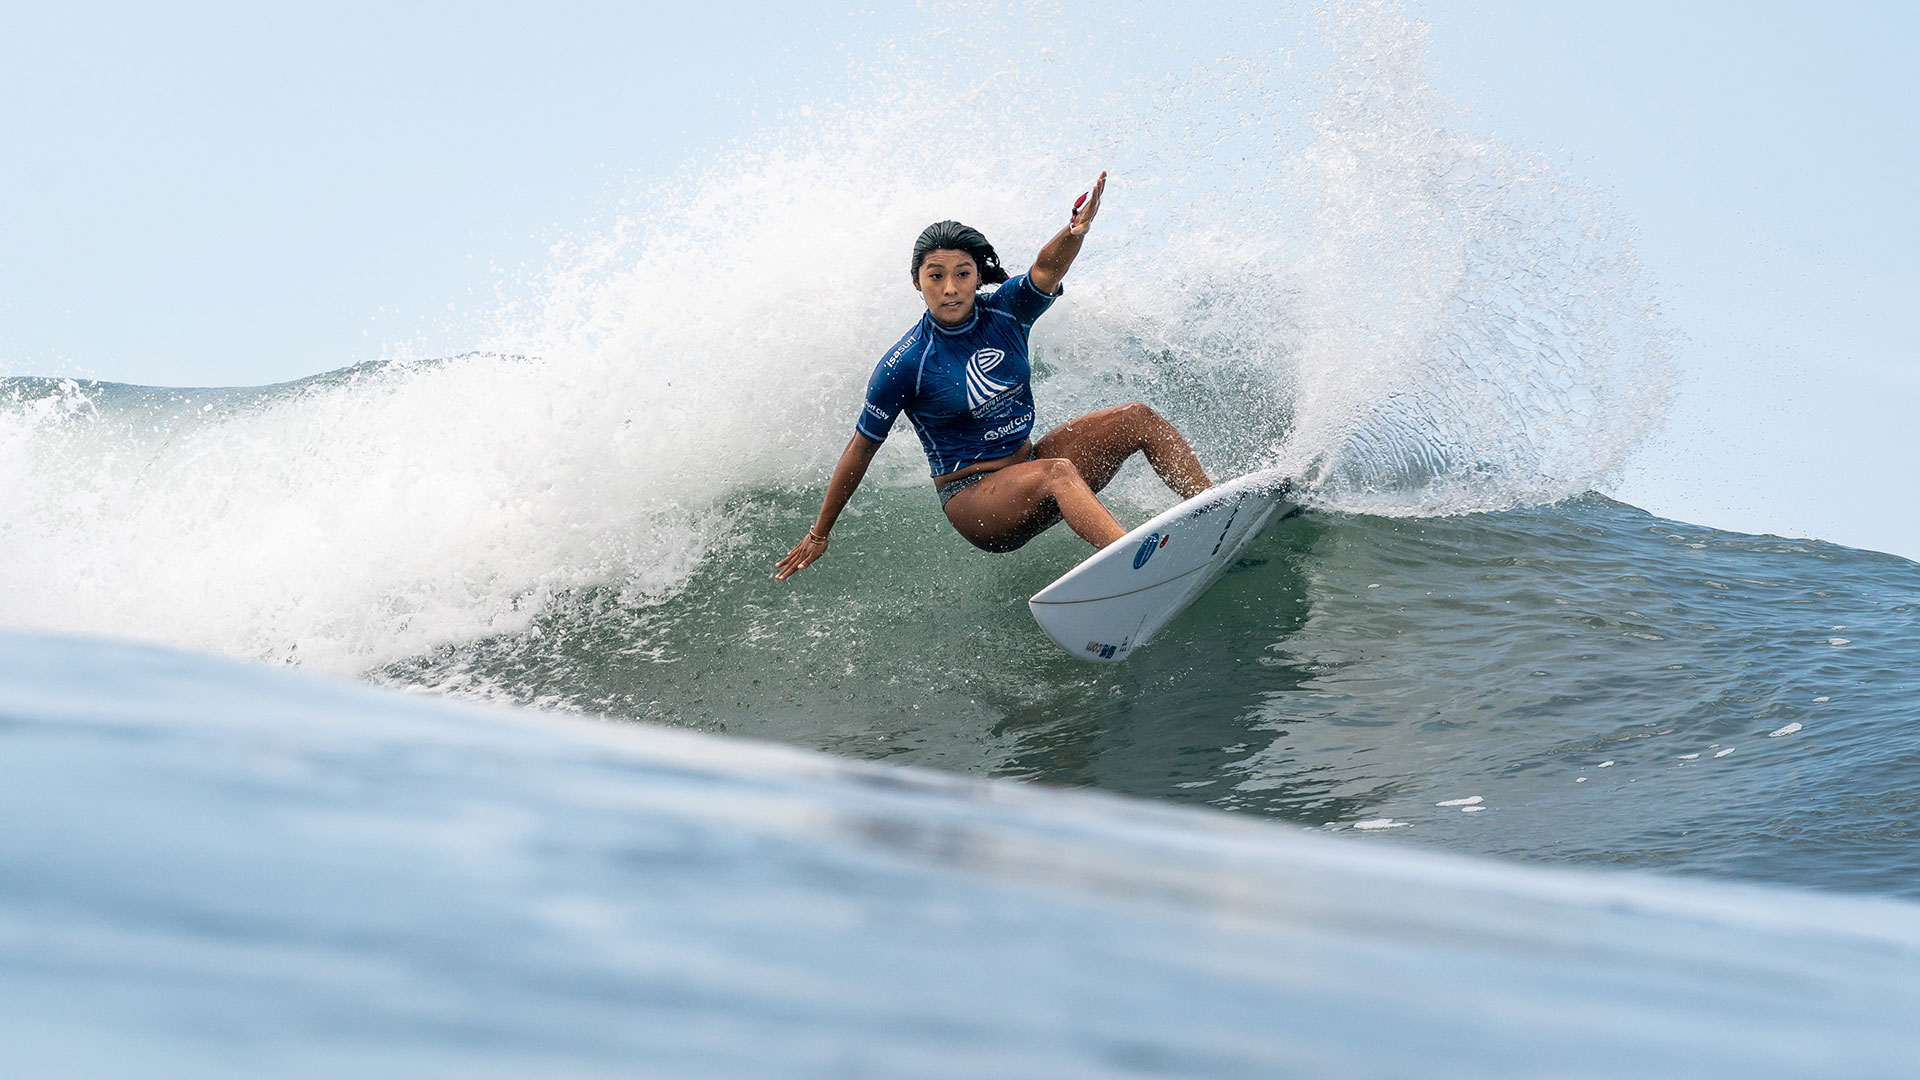 Both longboard and shortboard surfing will be on the Bali 2023 program, coming off the success of the sport's Olympic debut at Tokyo 2020 (ANOC)